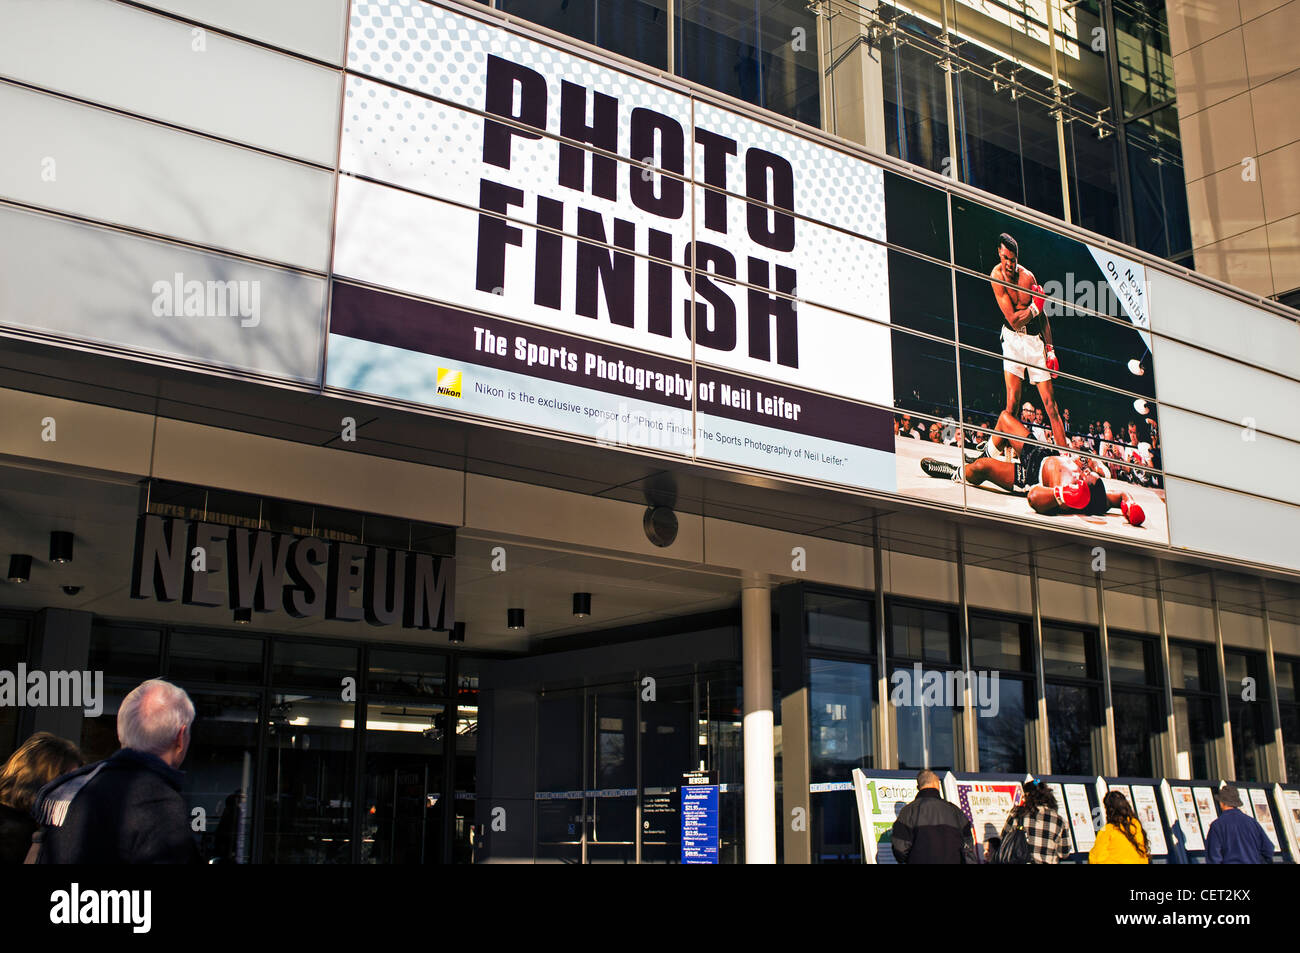 Photo Finish an exhibit of the work of Neil Liefer at the Newseum located at 555 Pennsylvania Avenue NW, Washington, D.C. Stock Photo